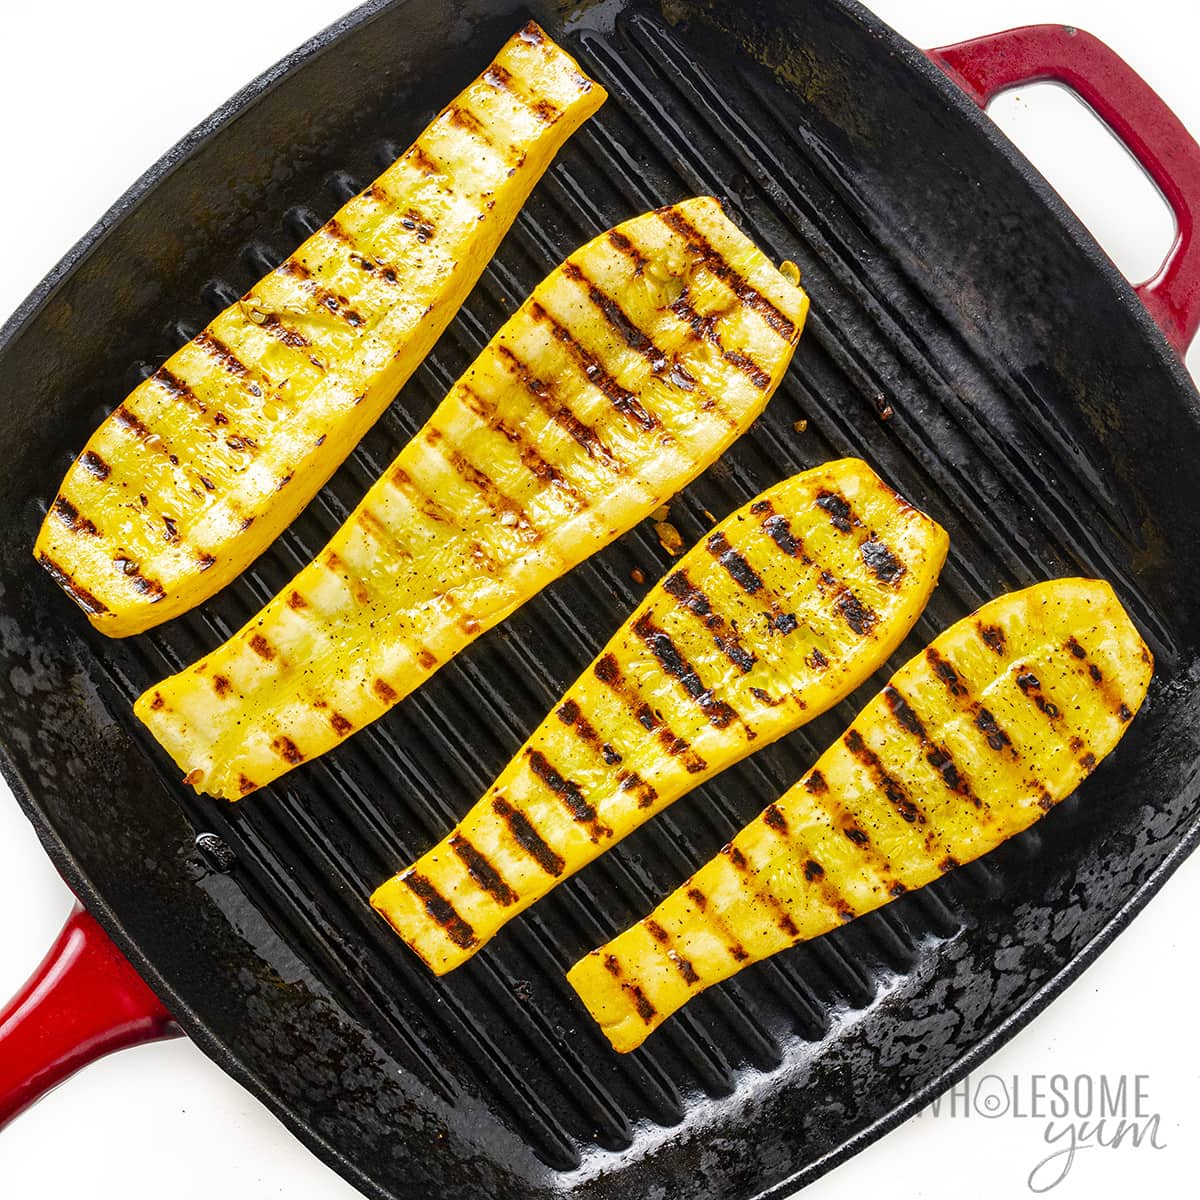 Grilled yellow squash.